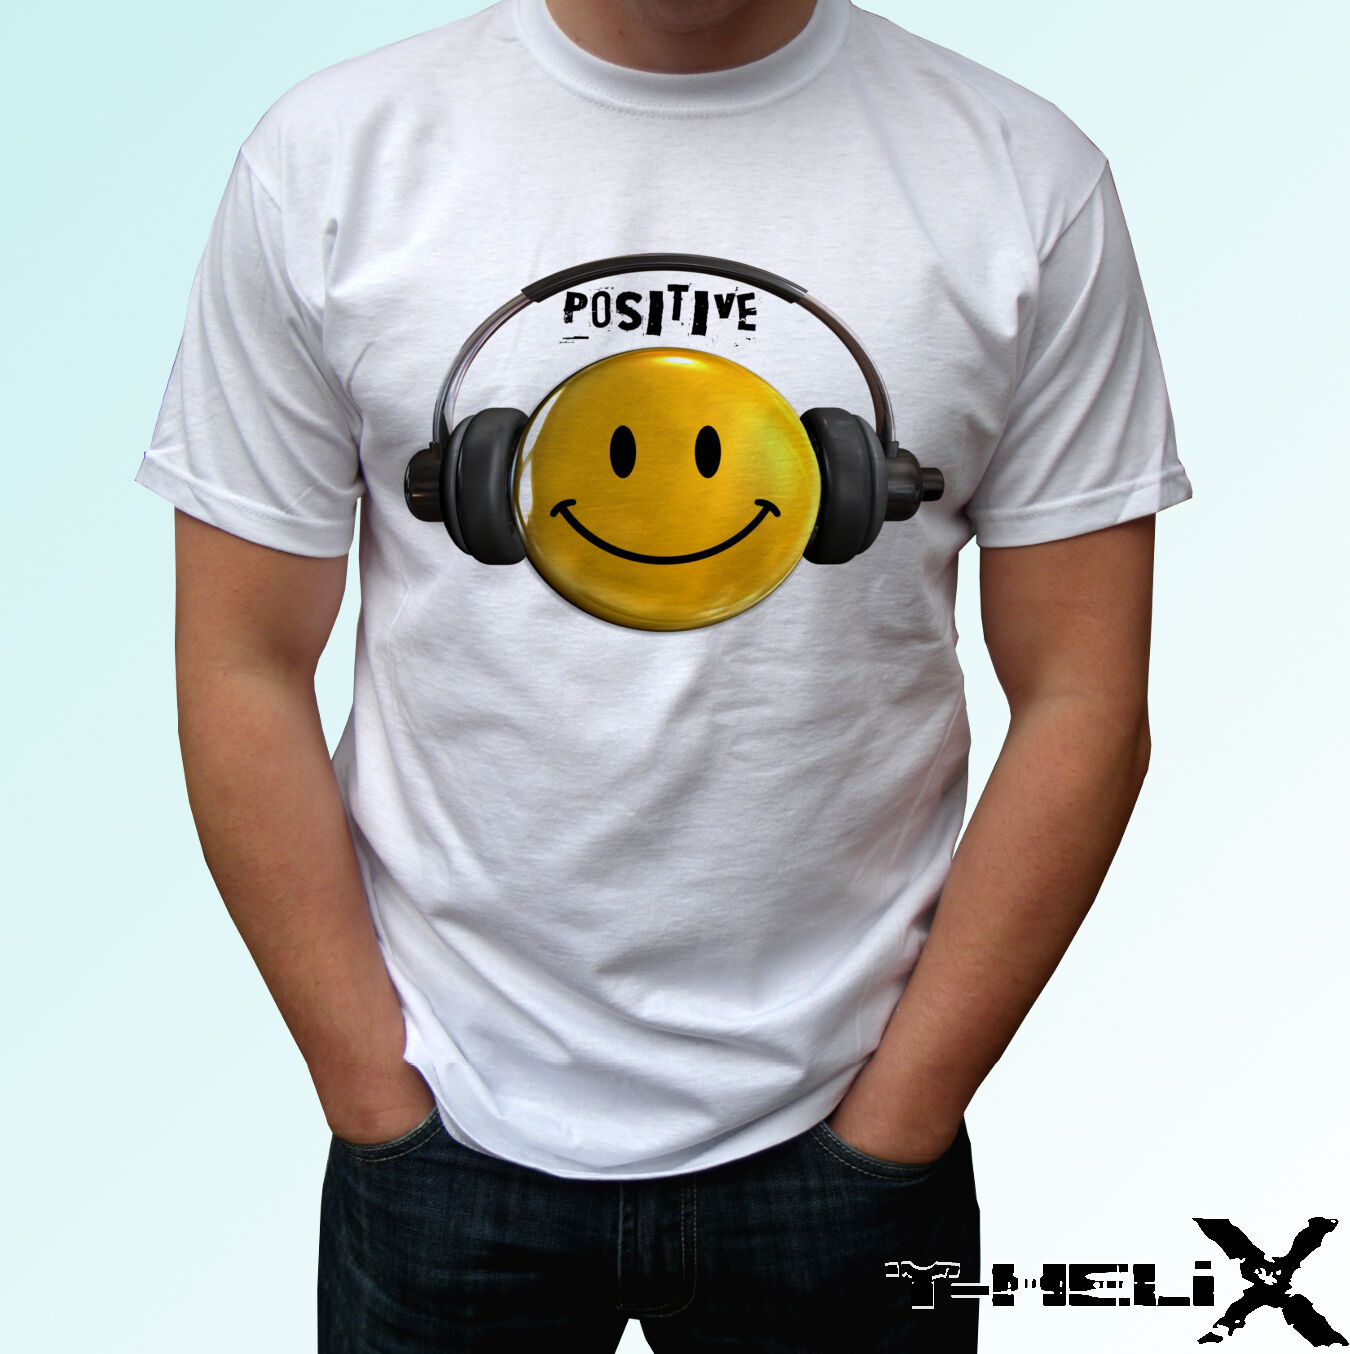 Positive music - white t shirt top peace smile design - mens womens kids  baby